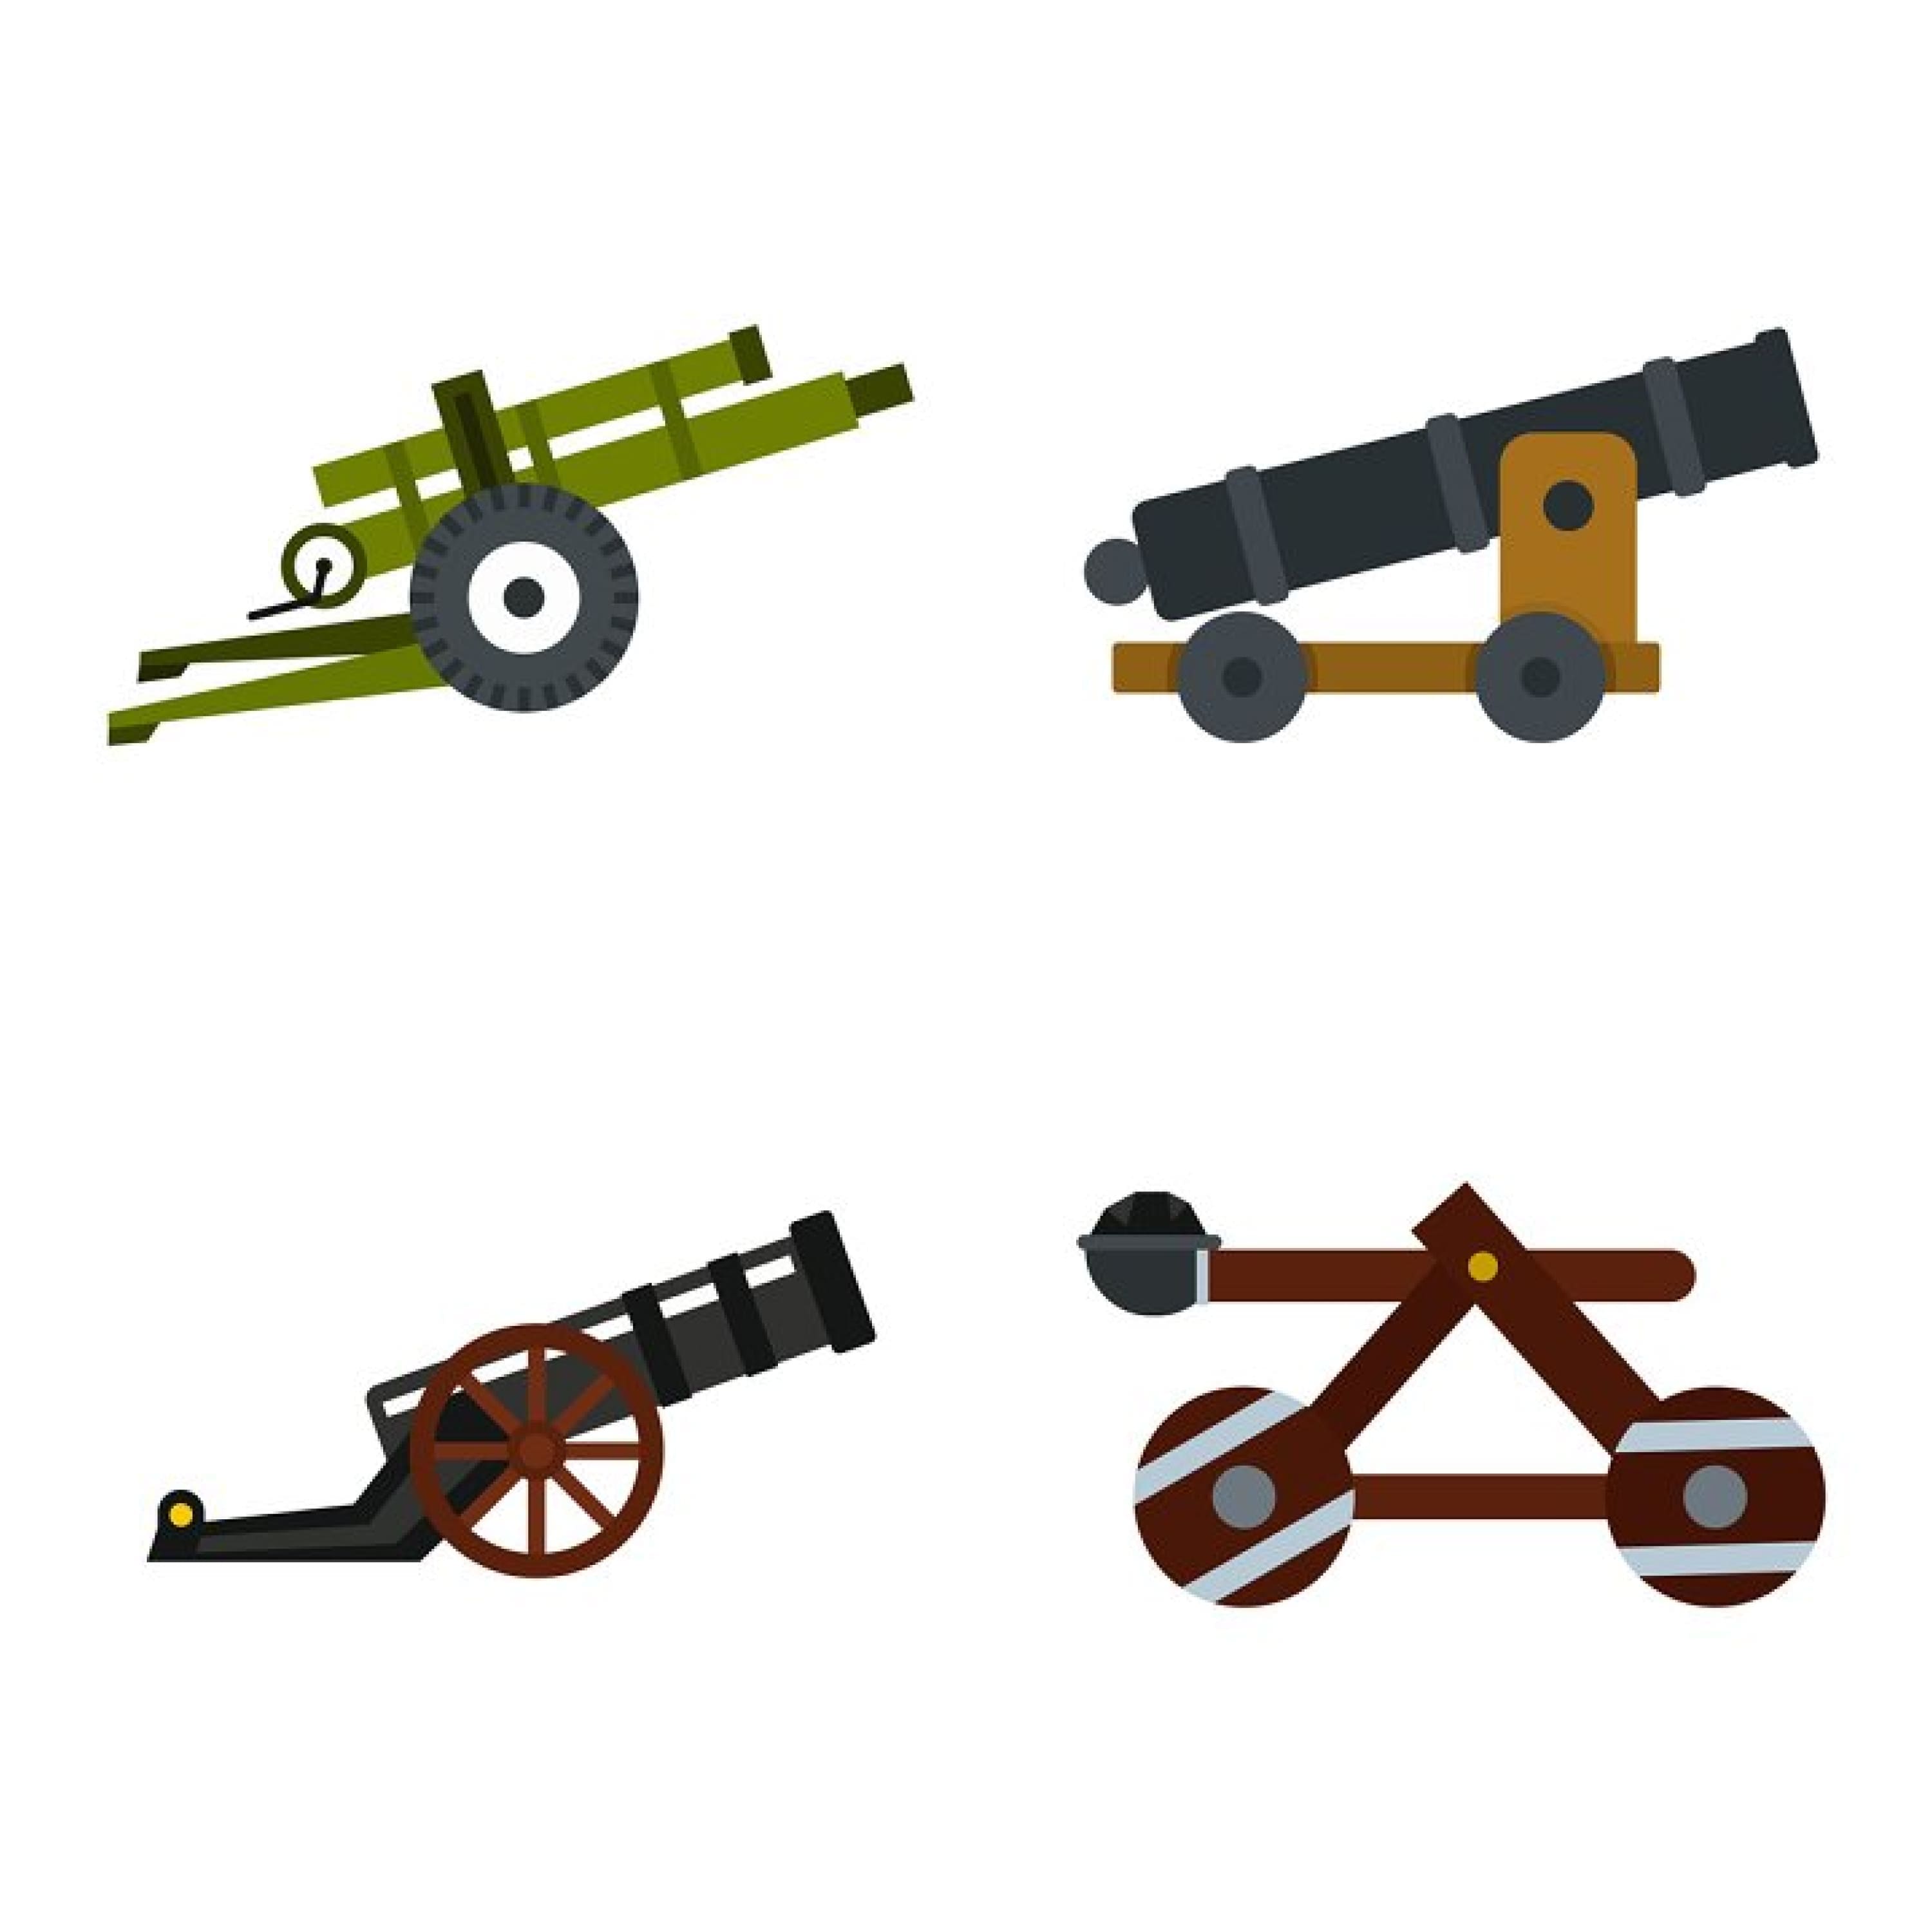 Images of guns at different time intervals.